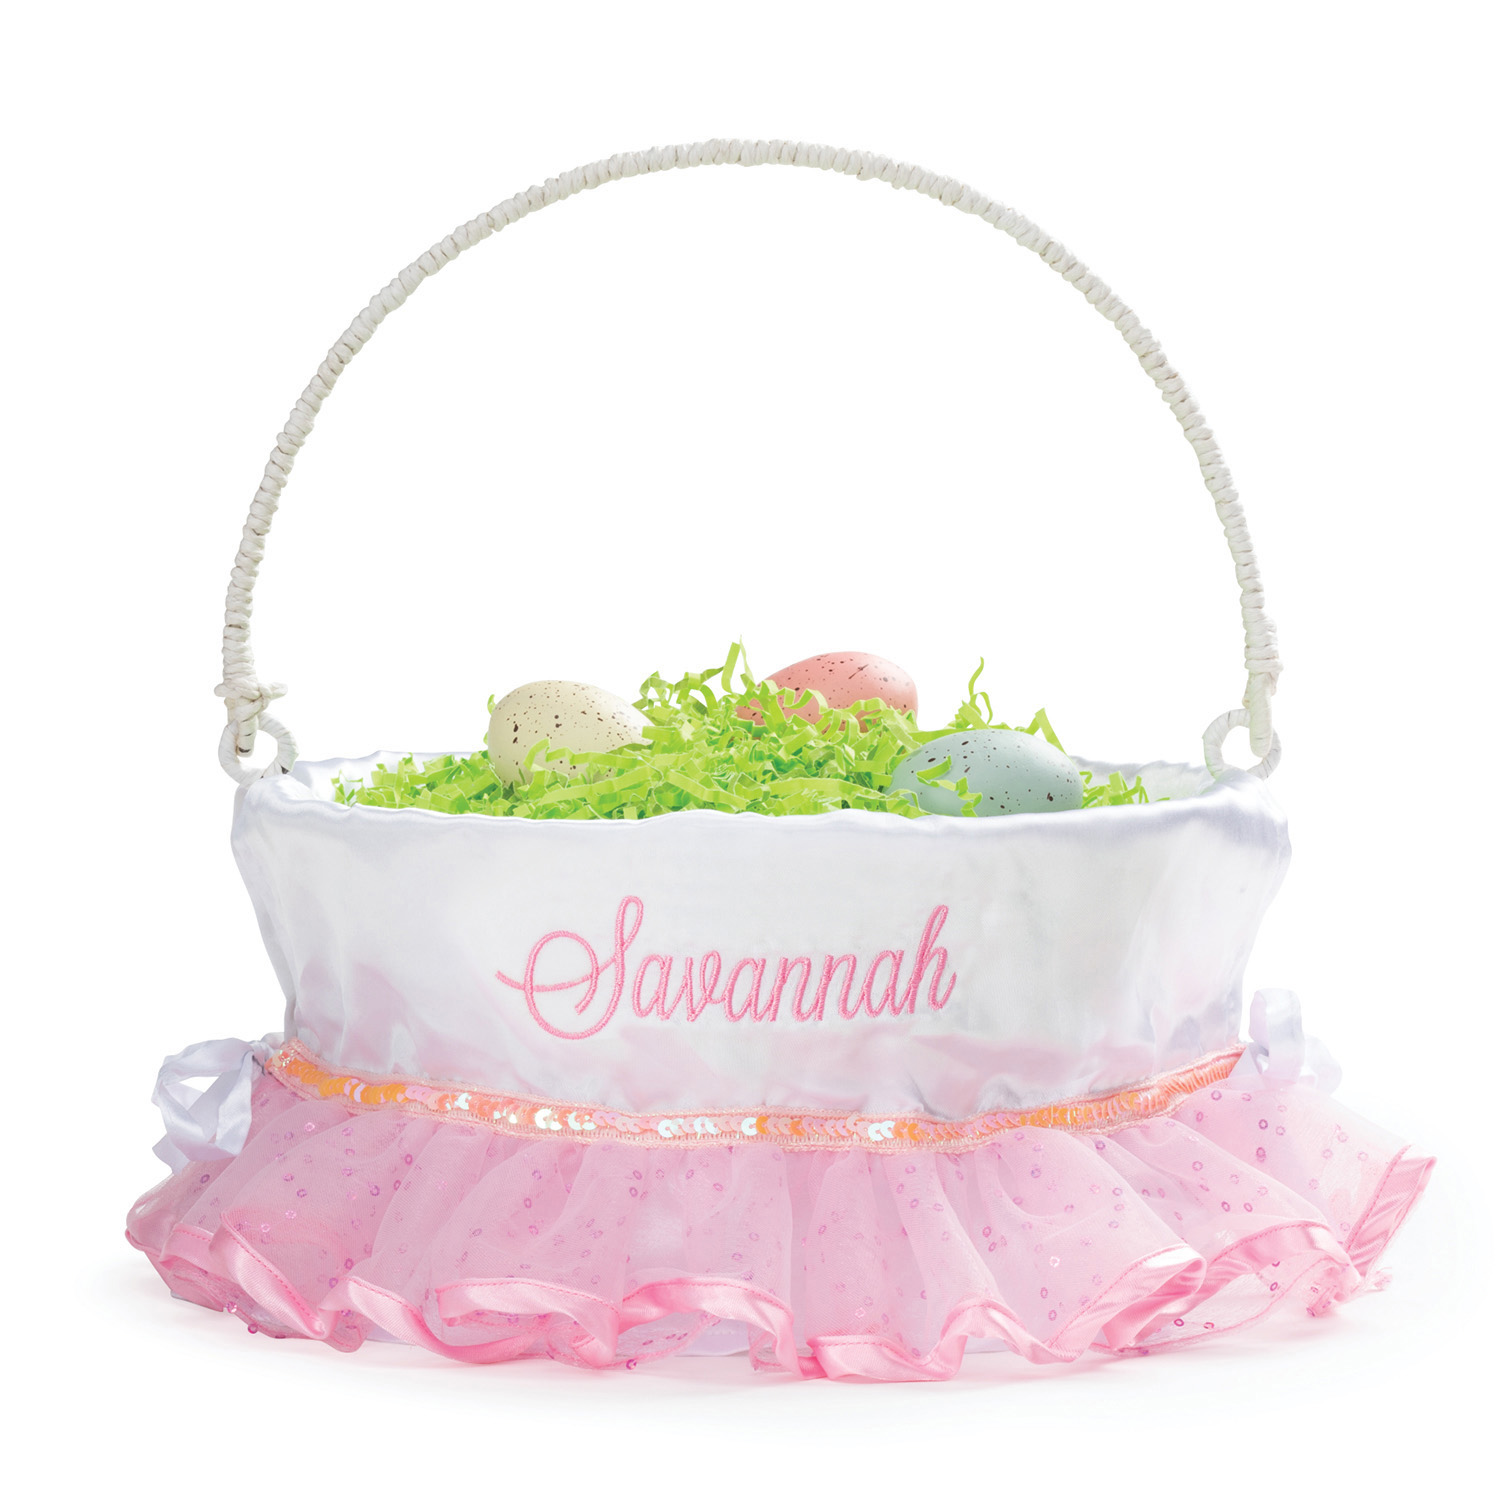 Personalized Planet Pink and White Tutu Liner with Custom Name Embroidered in Pink Thread on White Woven Spring Easter Basket with Collapsible Handle for Egg Hunt or Book Toy Storage - image 1 of 5